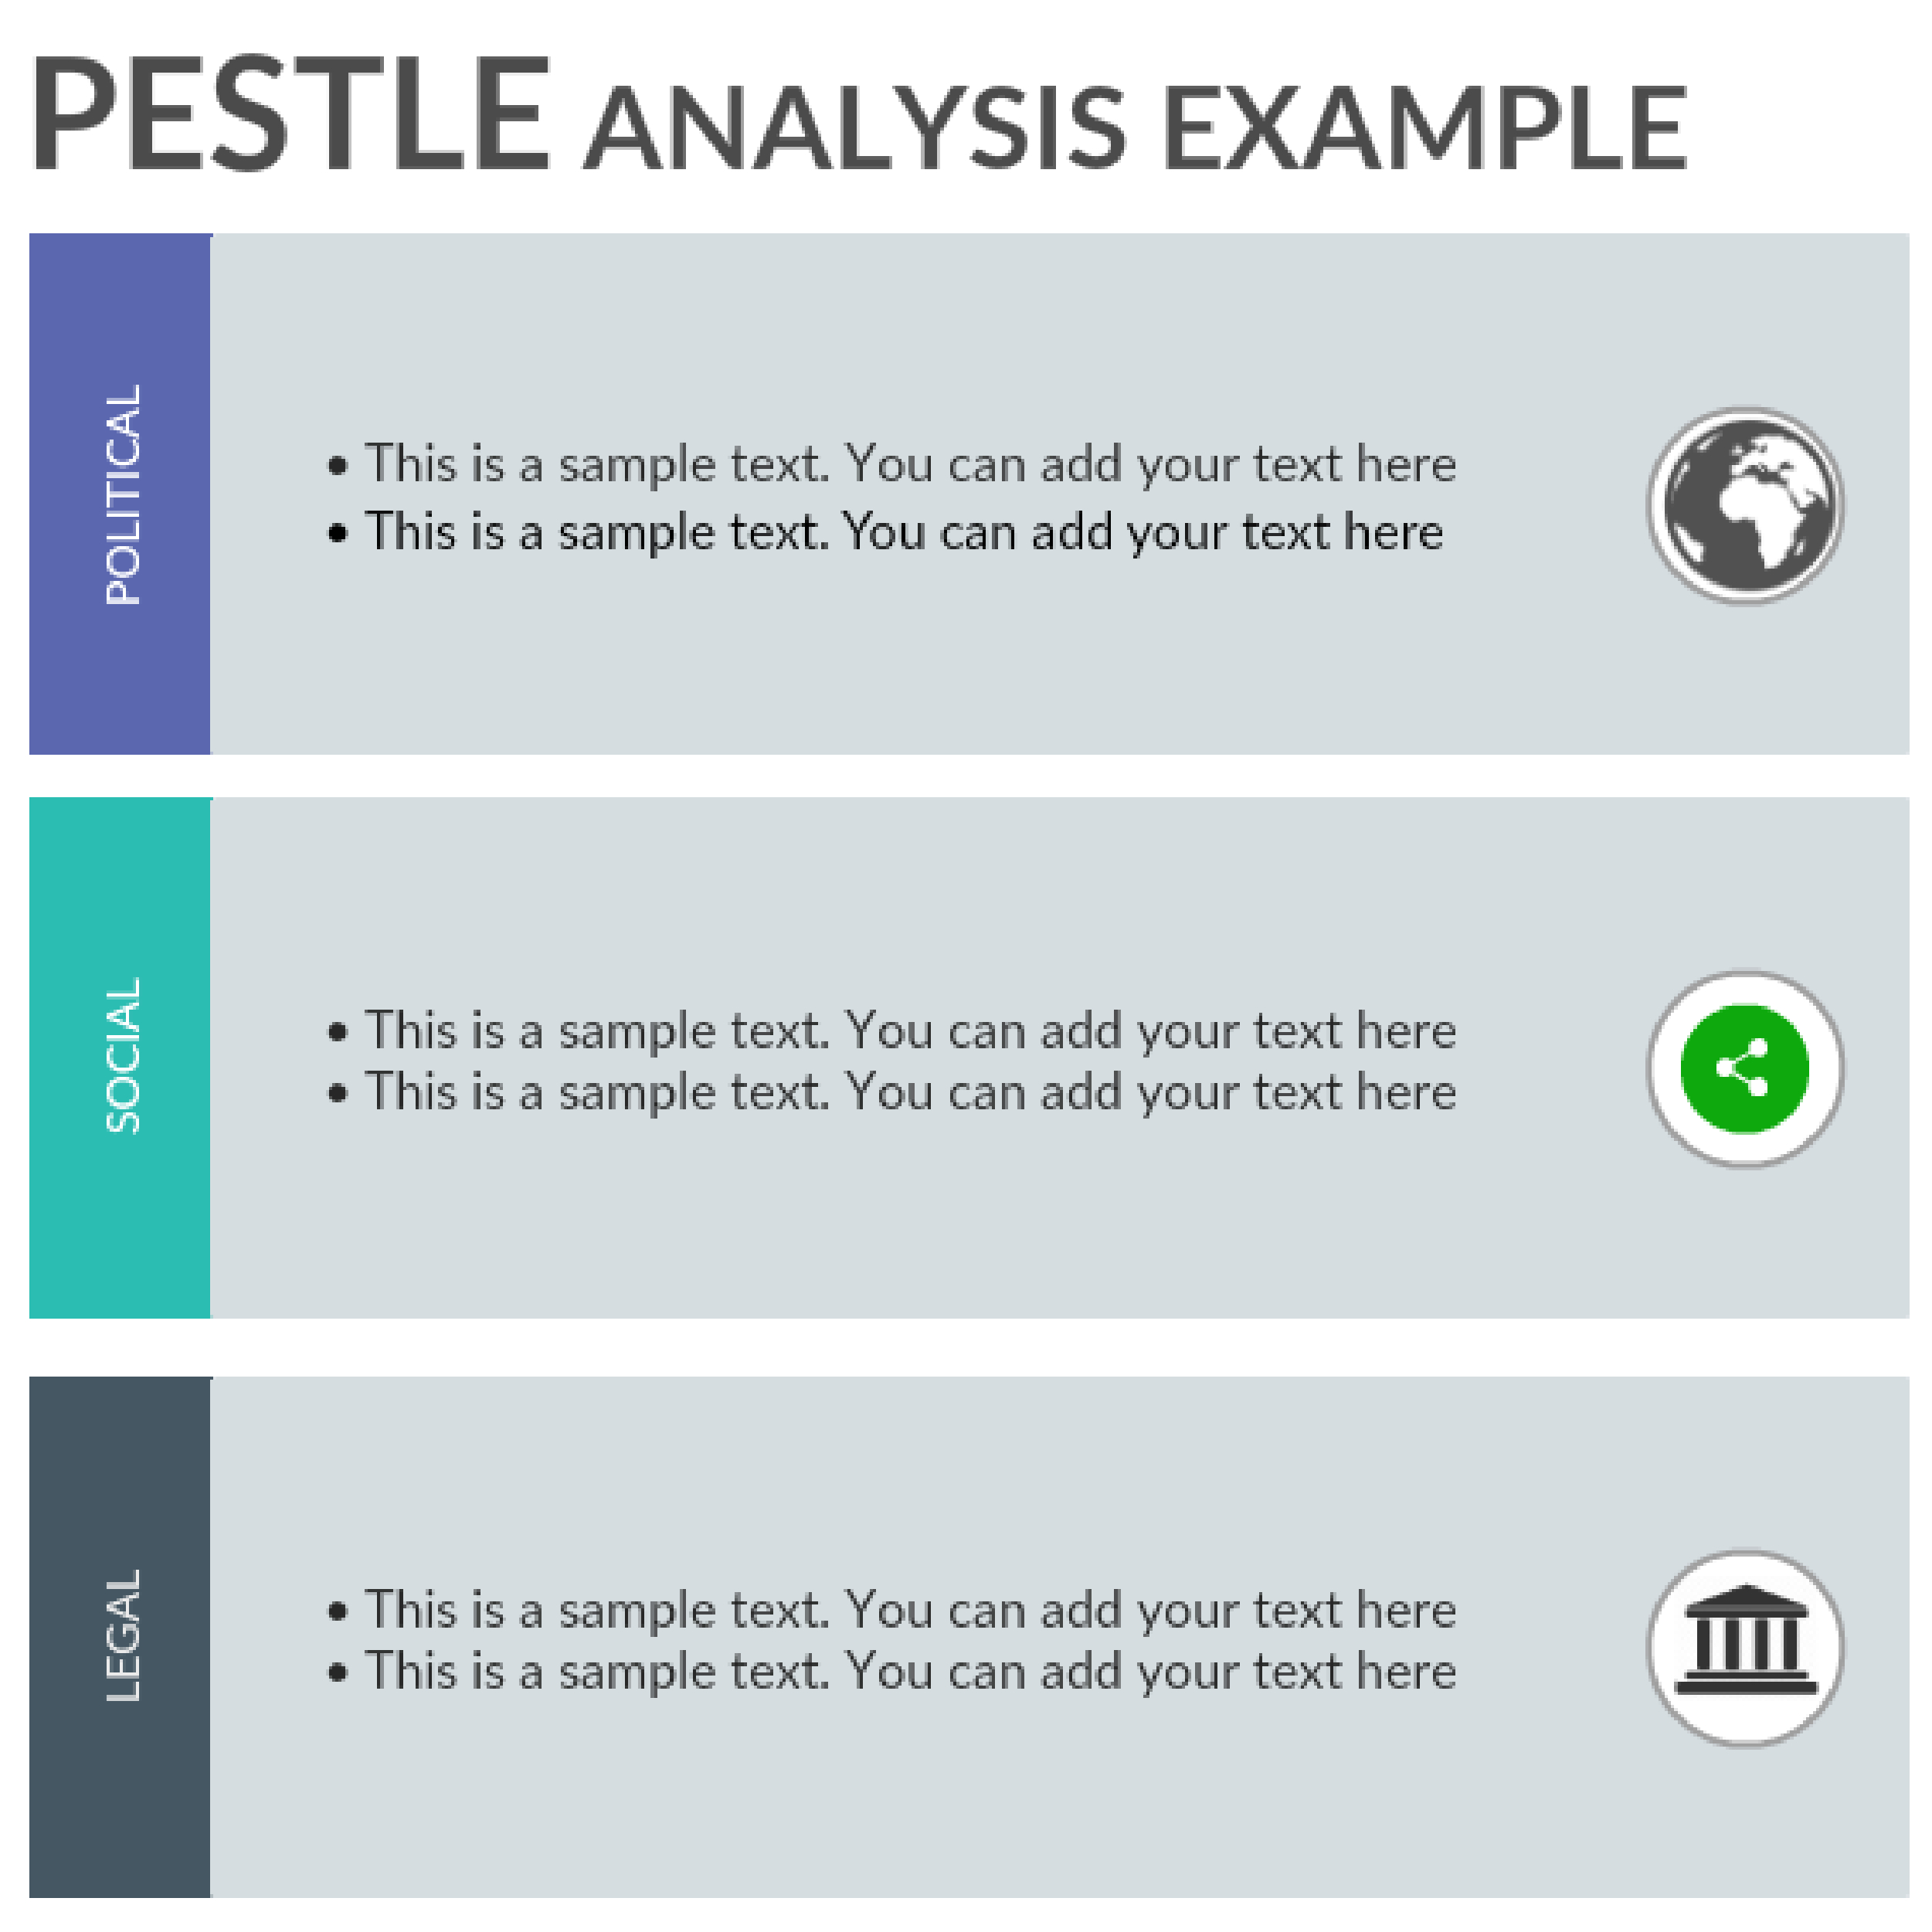 Steeple Analysis Example Template | Creately With Pestel Analysis Template Word